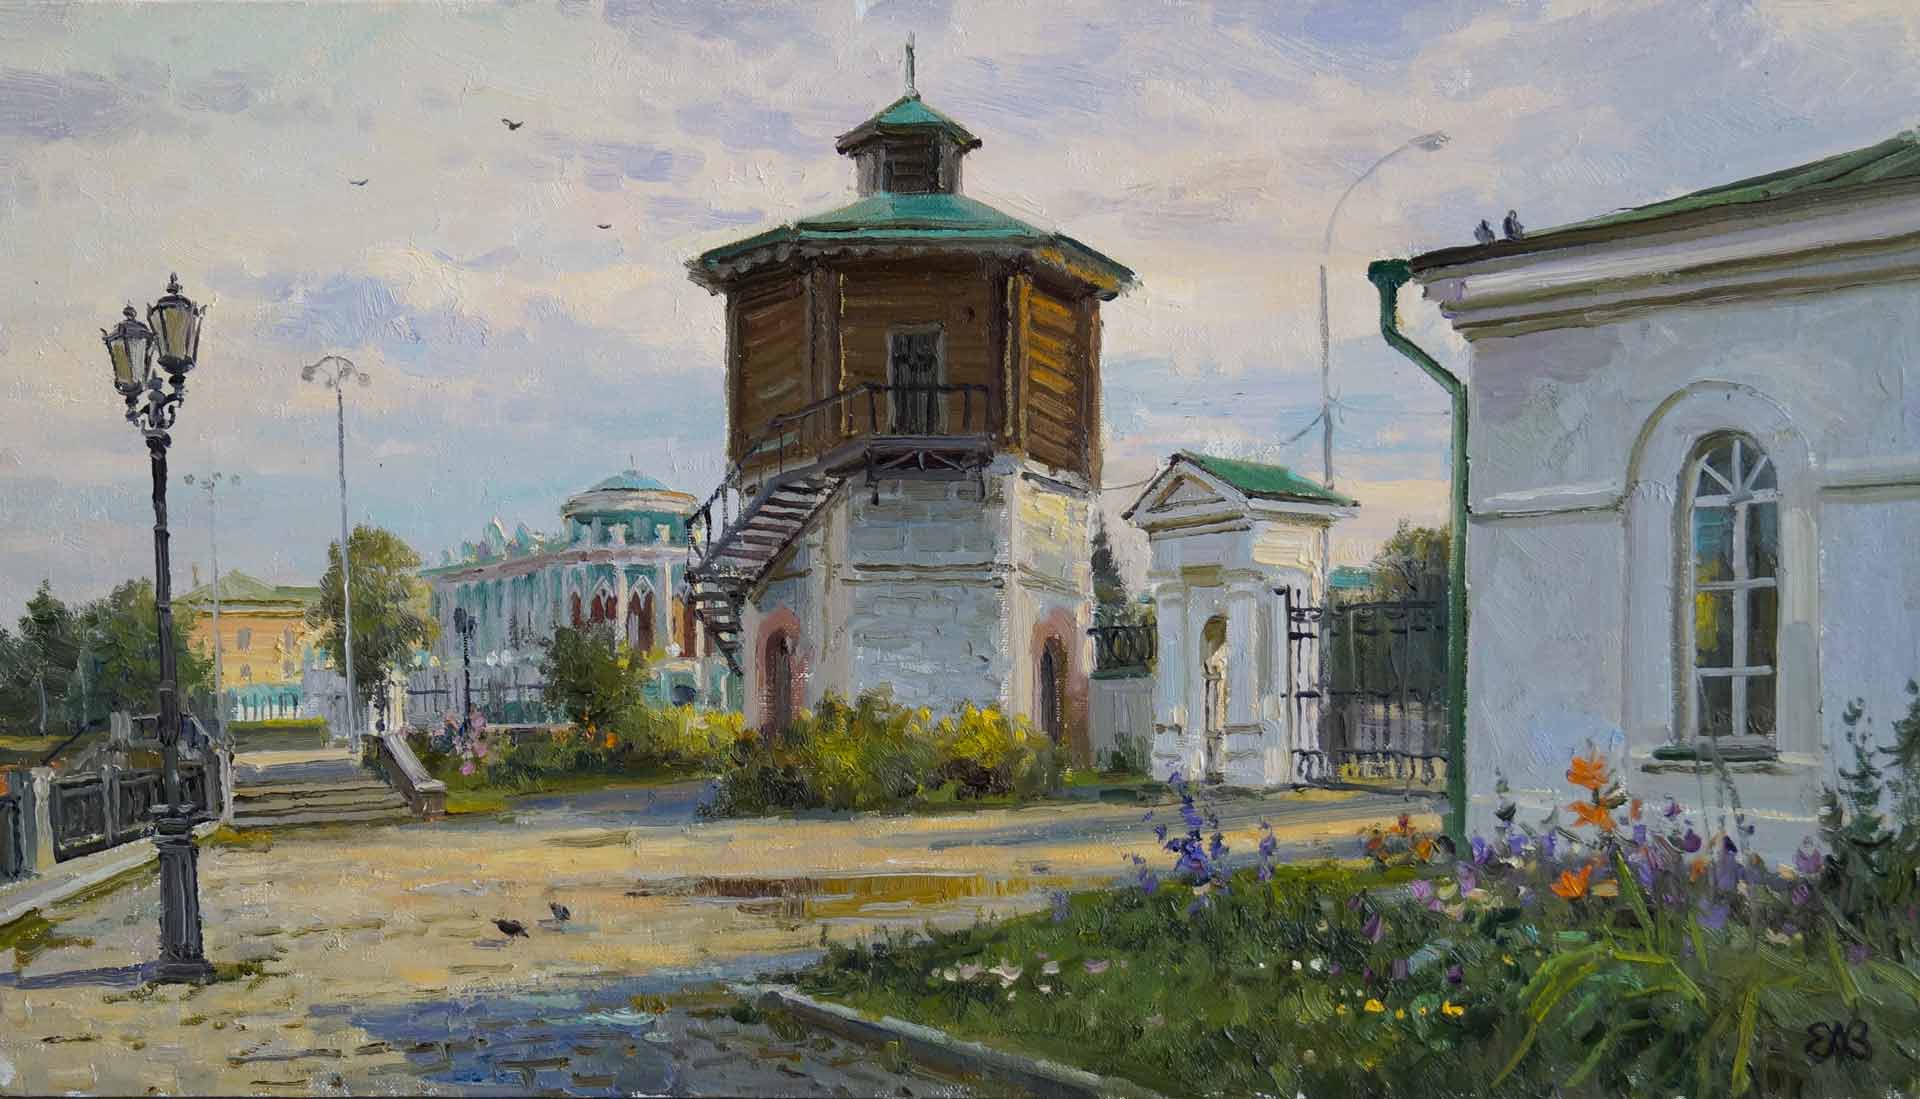 By the Old Factory. Ekaterinburg - 1, Alexey Efremov, Buy the painting Oil